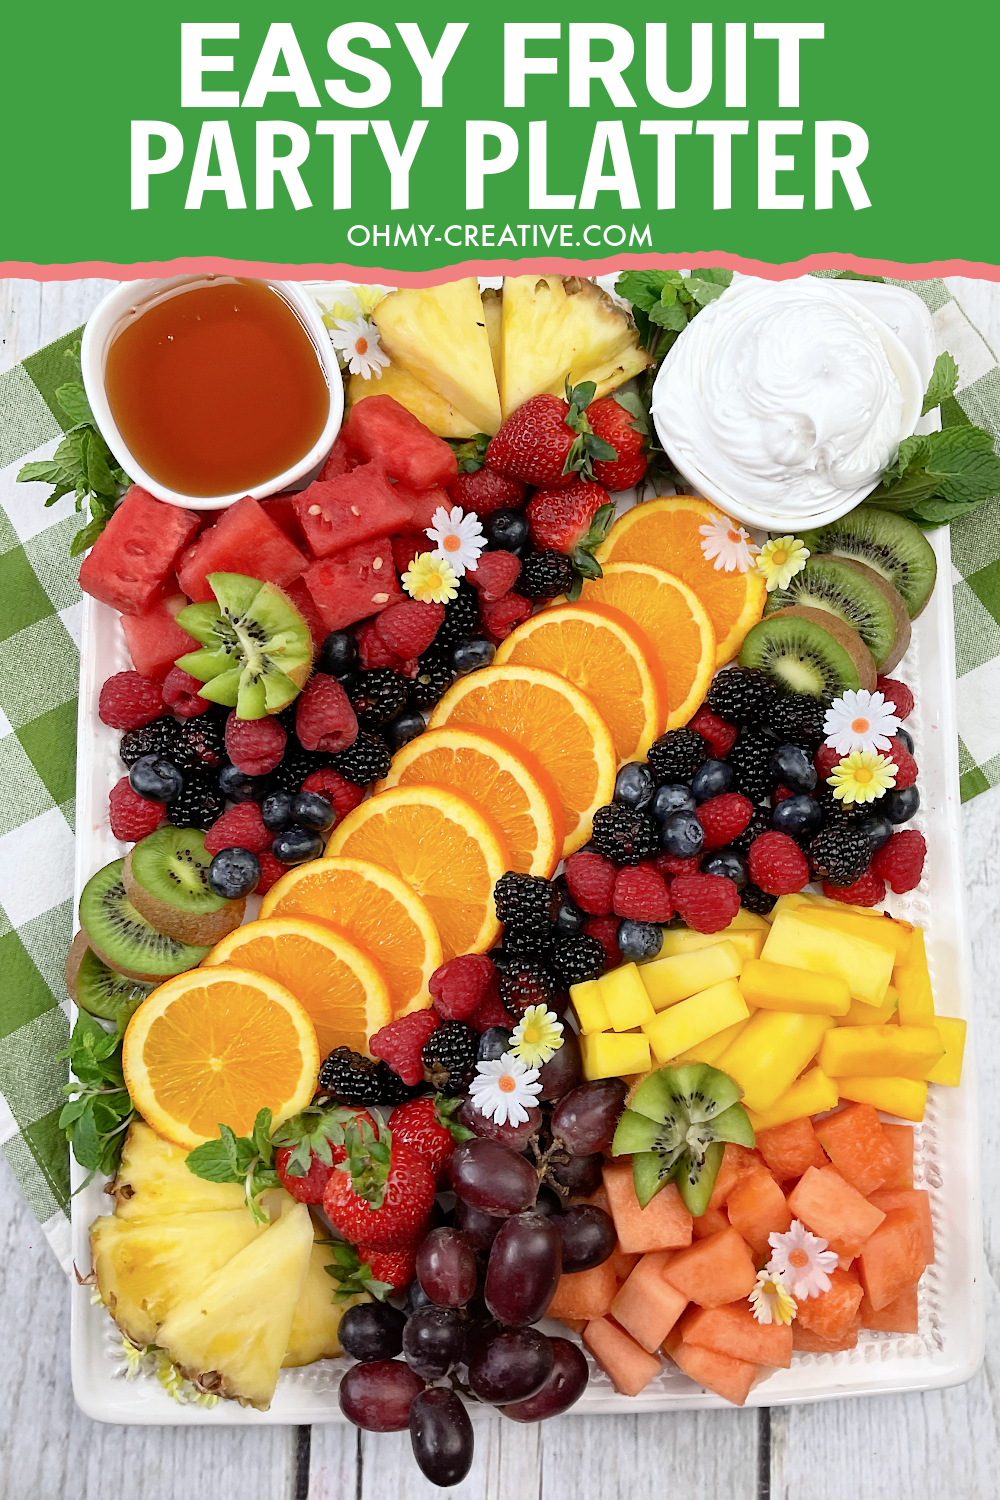 Easy Fruit Party Platter with oranges, berries, kiwi, pineapple and more.